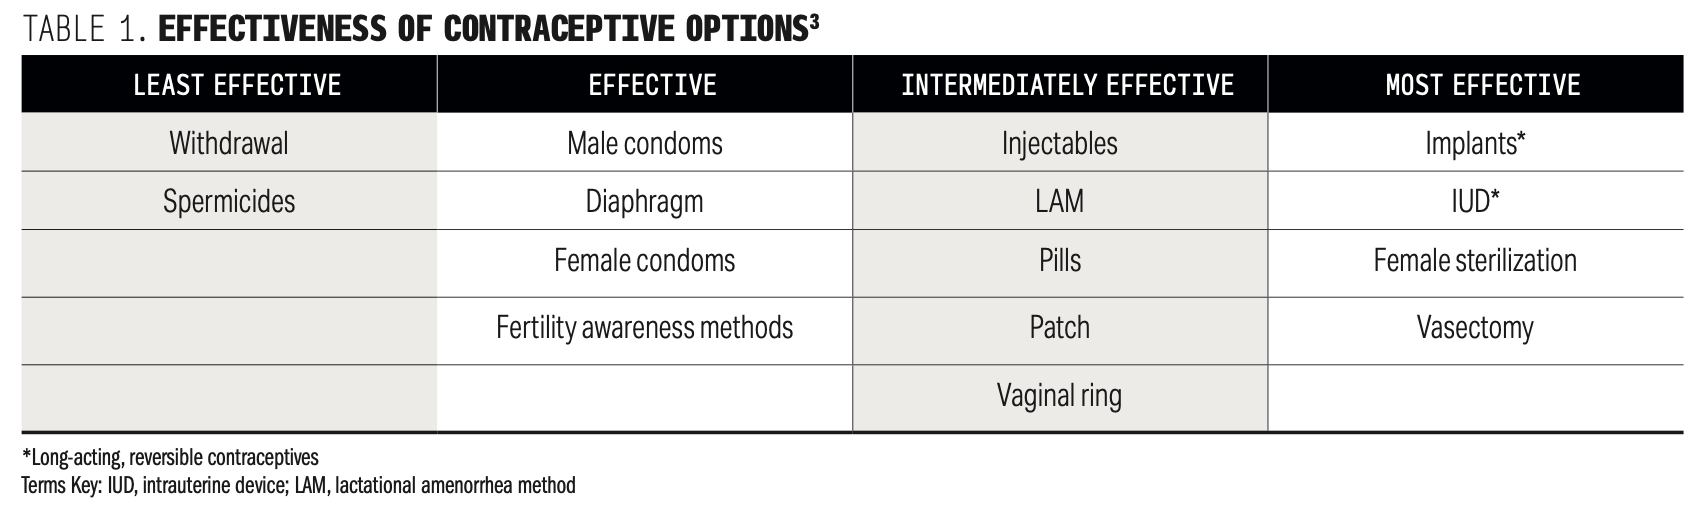 Table 1. Effectiveness of Contraceptive Options